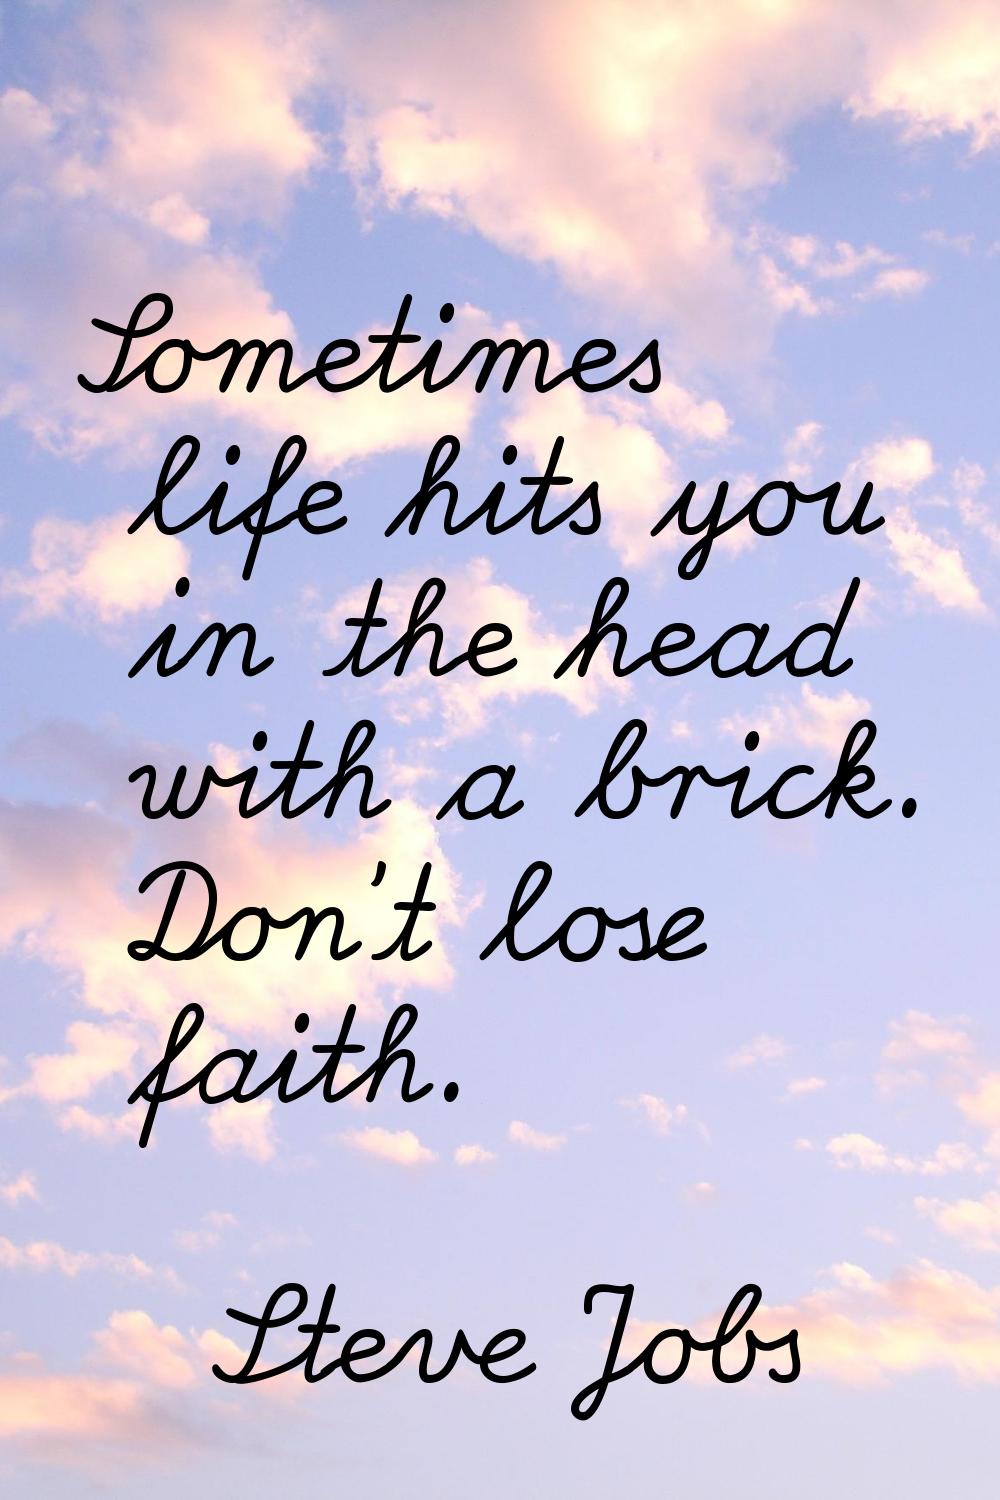 Sometimes life hits you in the head with a brick. Don't lose faith.